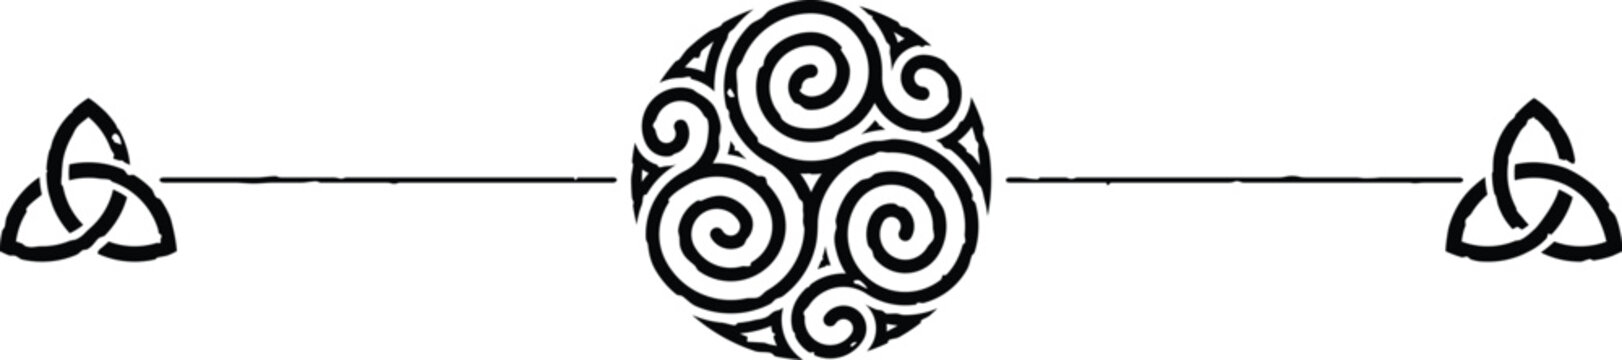 Celtic Symbols Header with Spirals and Triquetra